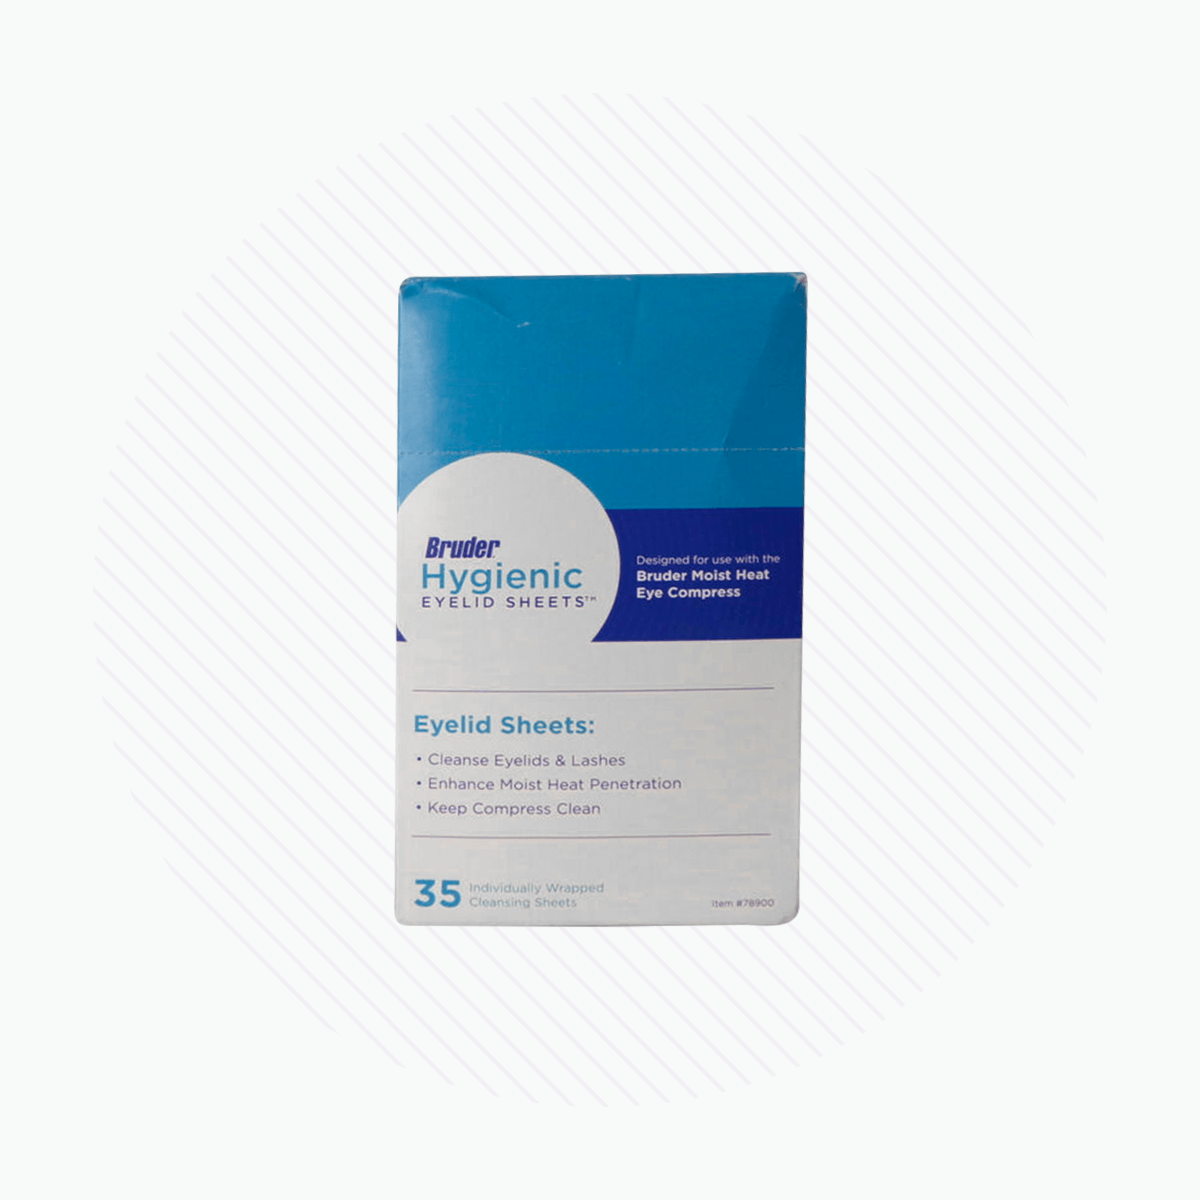 Bruder Hygienic Eyelid Sheets 35 Count Box (Used with Bruder Mask) - DryEye Rescue Store